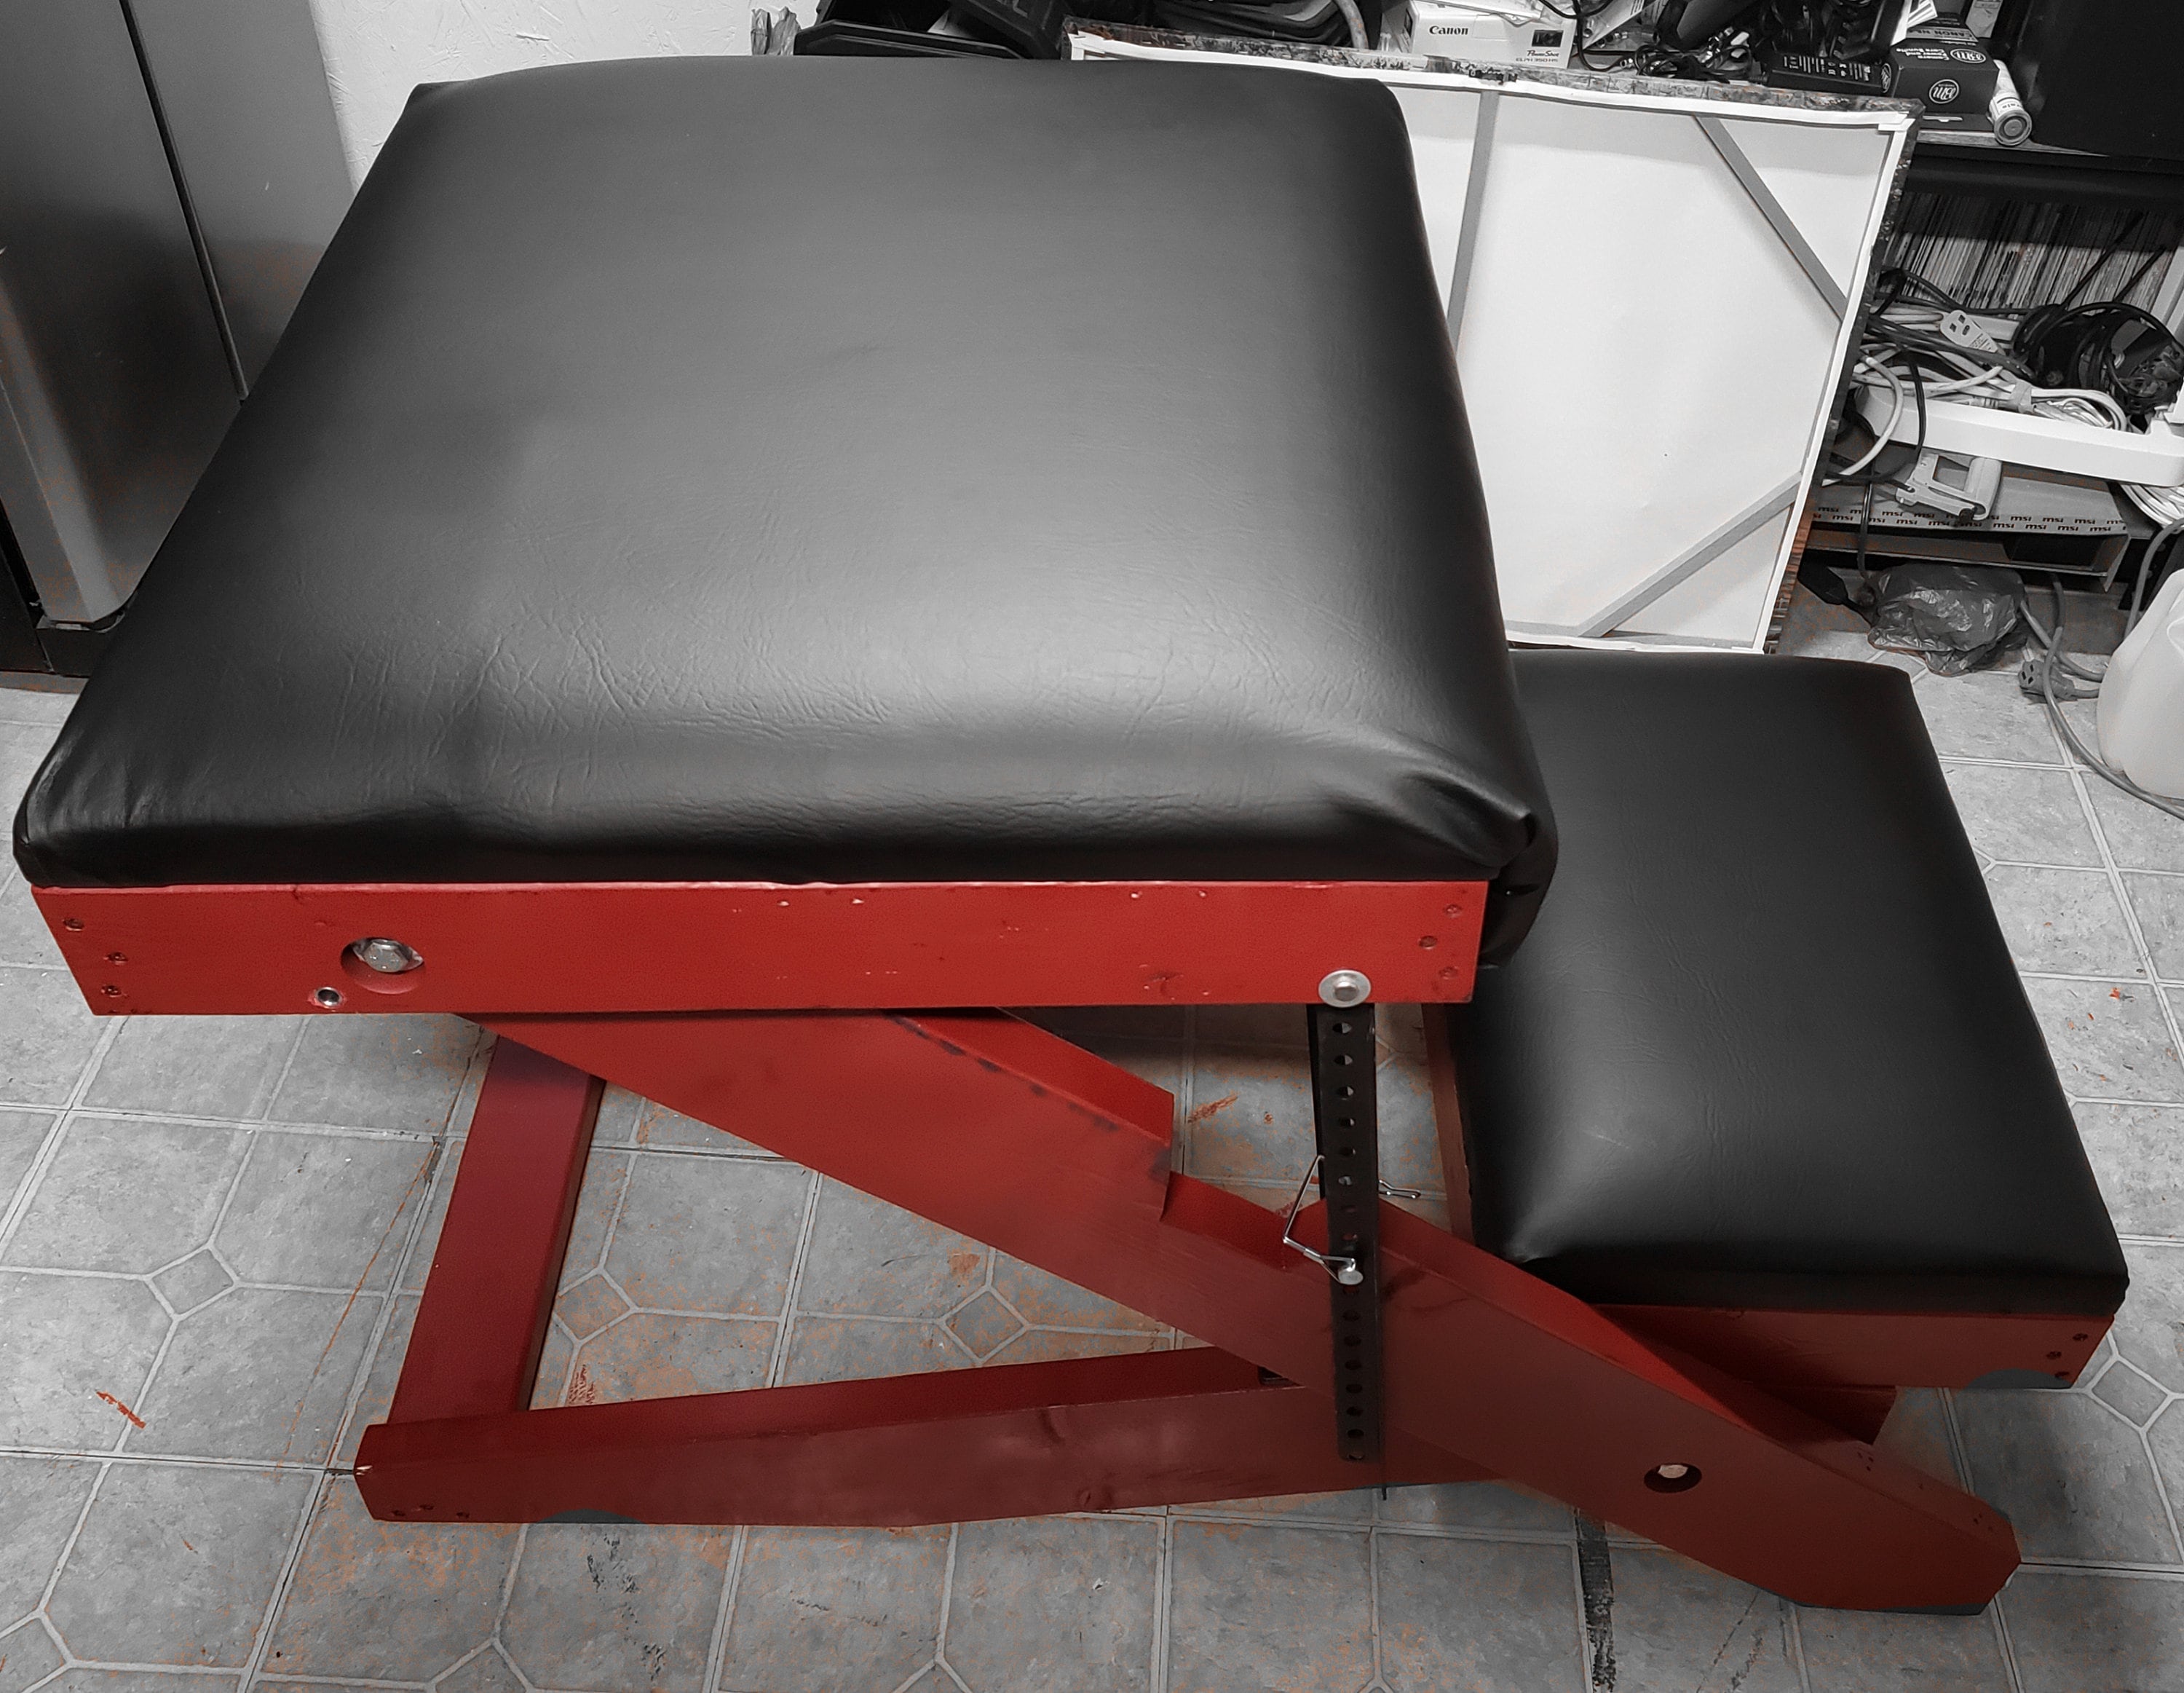 Adjustable/collapsible BDSM Bench Plans